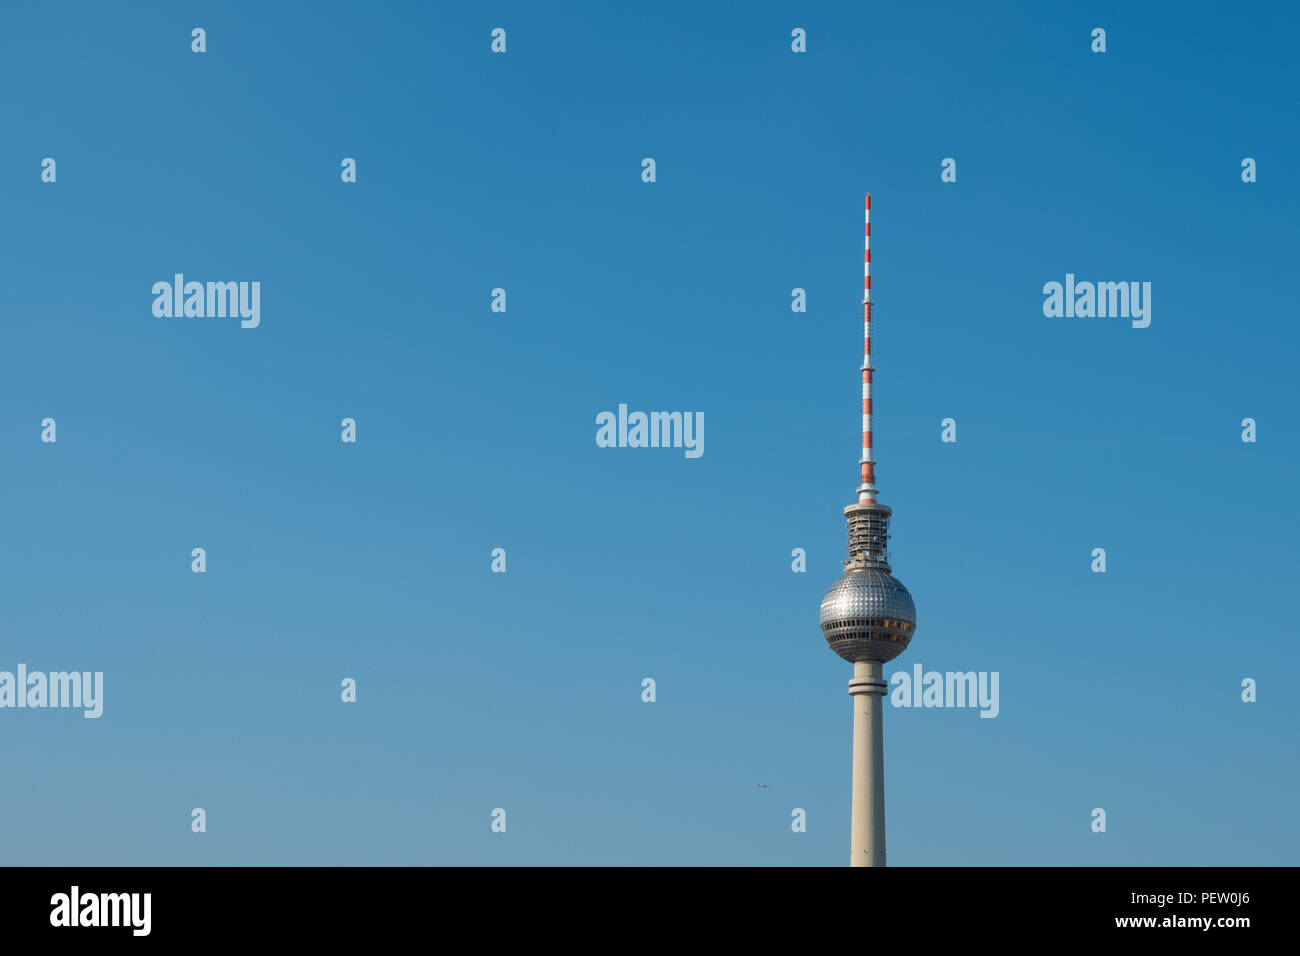 Tv tower / television Tower / Fernsehturm in Berlin Stock Photo